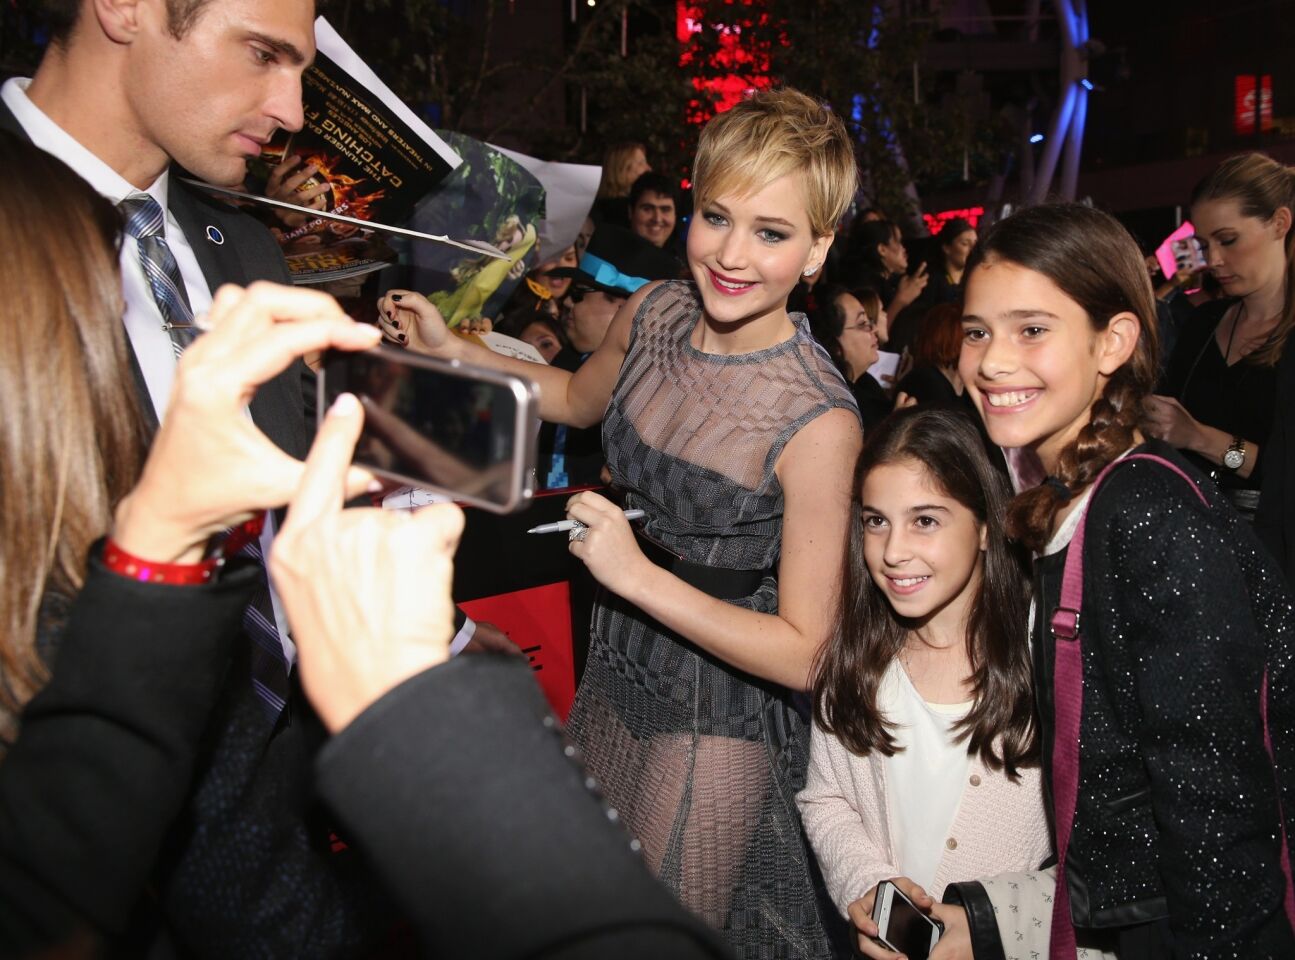 'The Hunger Games: Cathing Fire' premiere